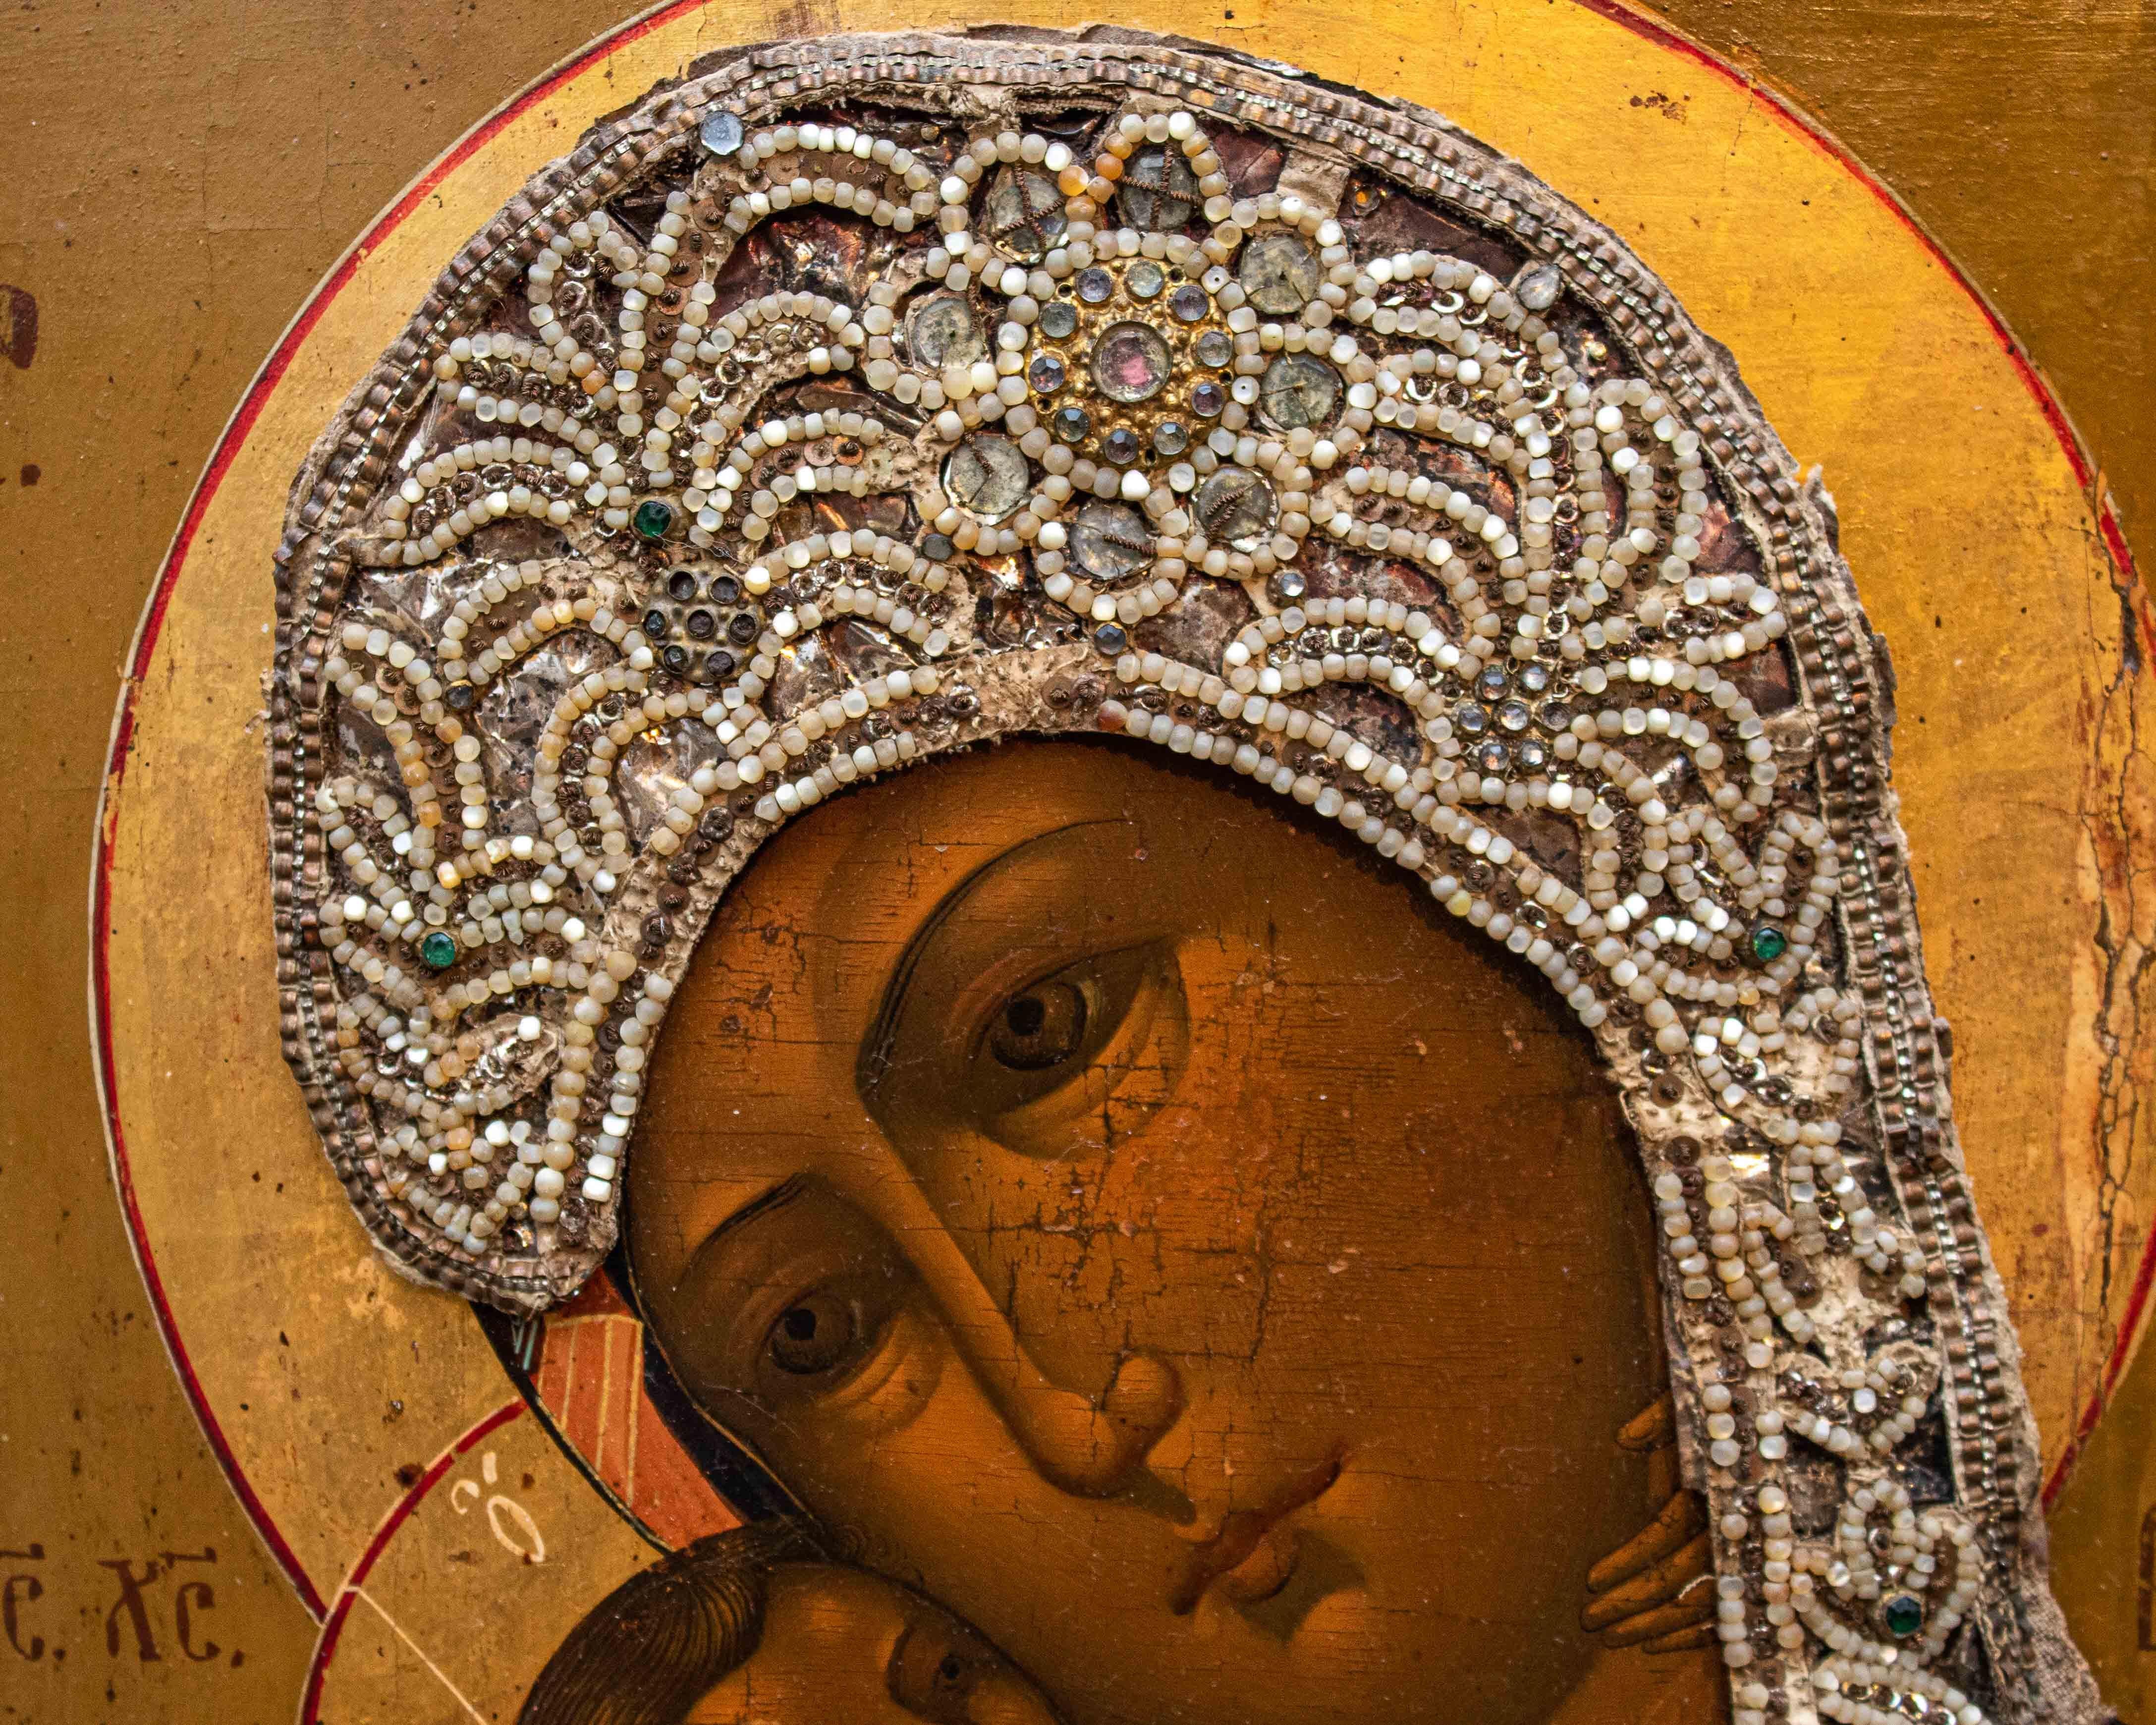 Early 19th century, Central Russia
Vladimir's Mother of God
Egg tempera on wood and Riza with orific embroidery, 53.5 x 42.5 x 4 cm

This work presents the iconography of one of the most revered and famous Orthodox icons in the world: Vladimir's